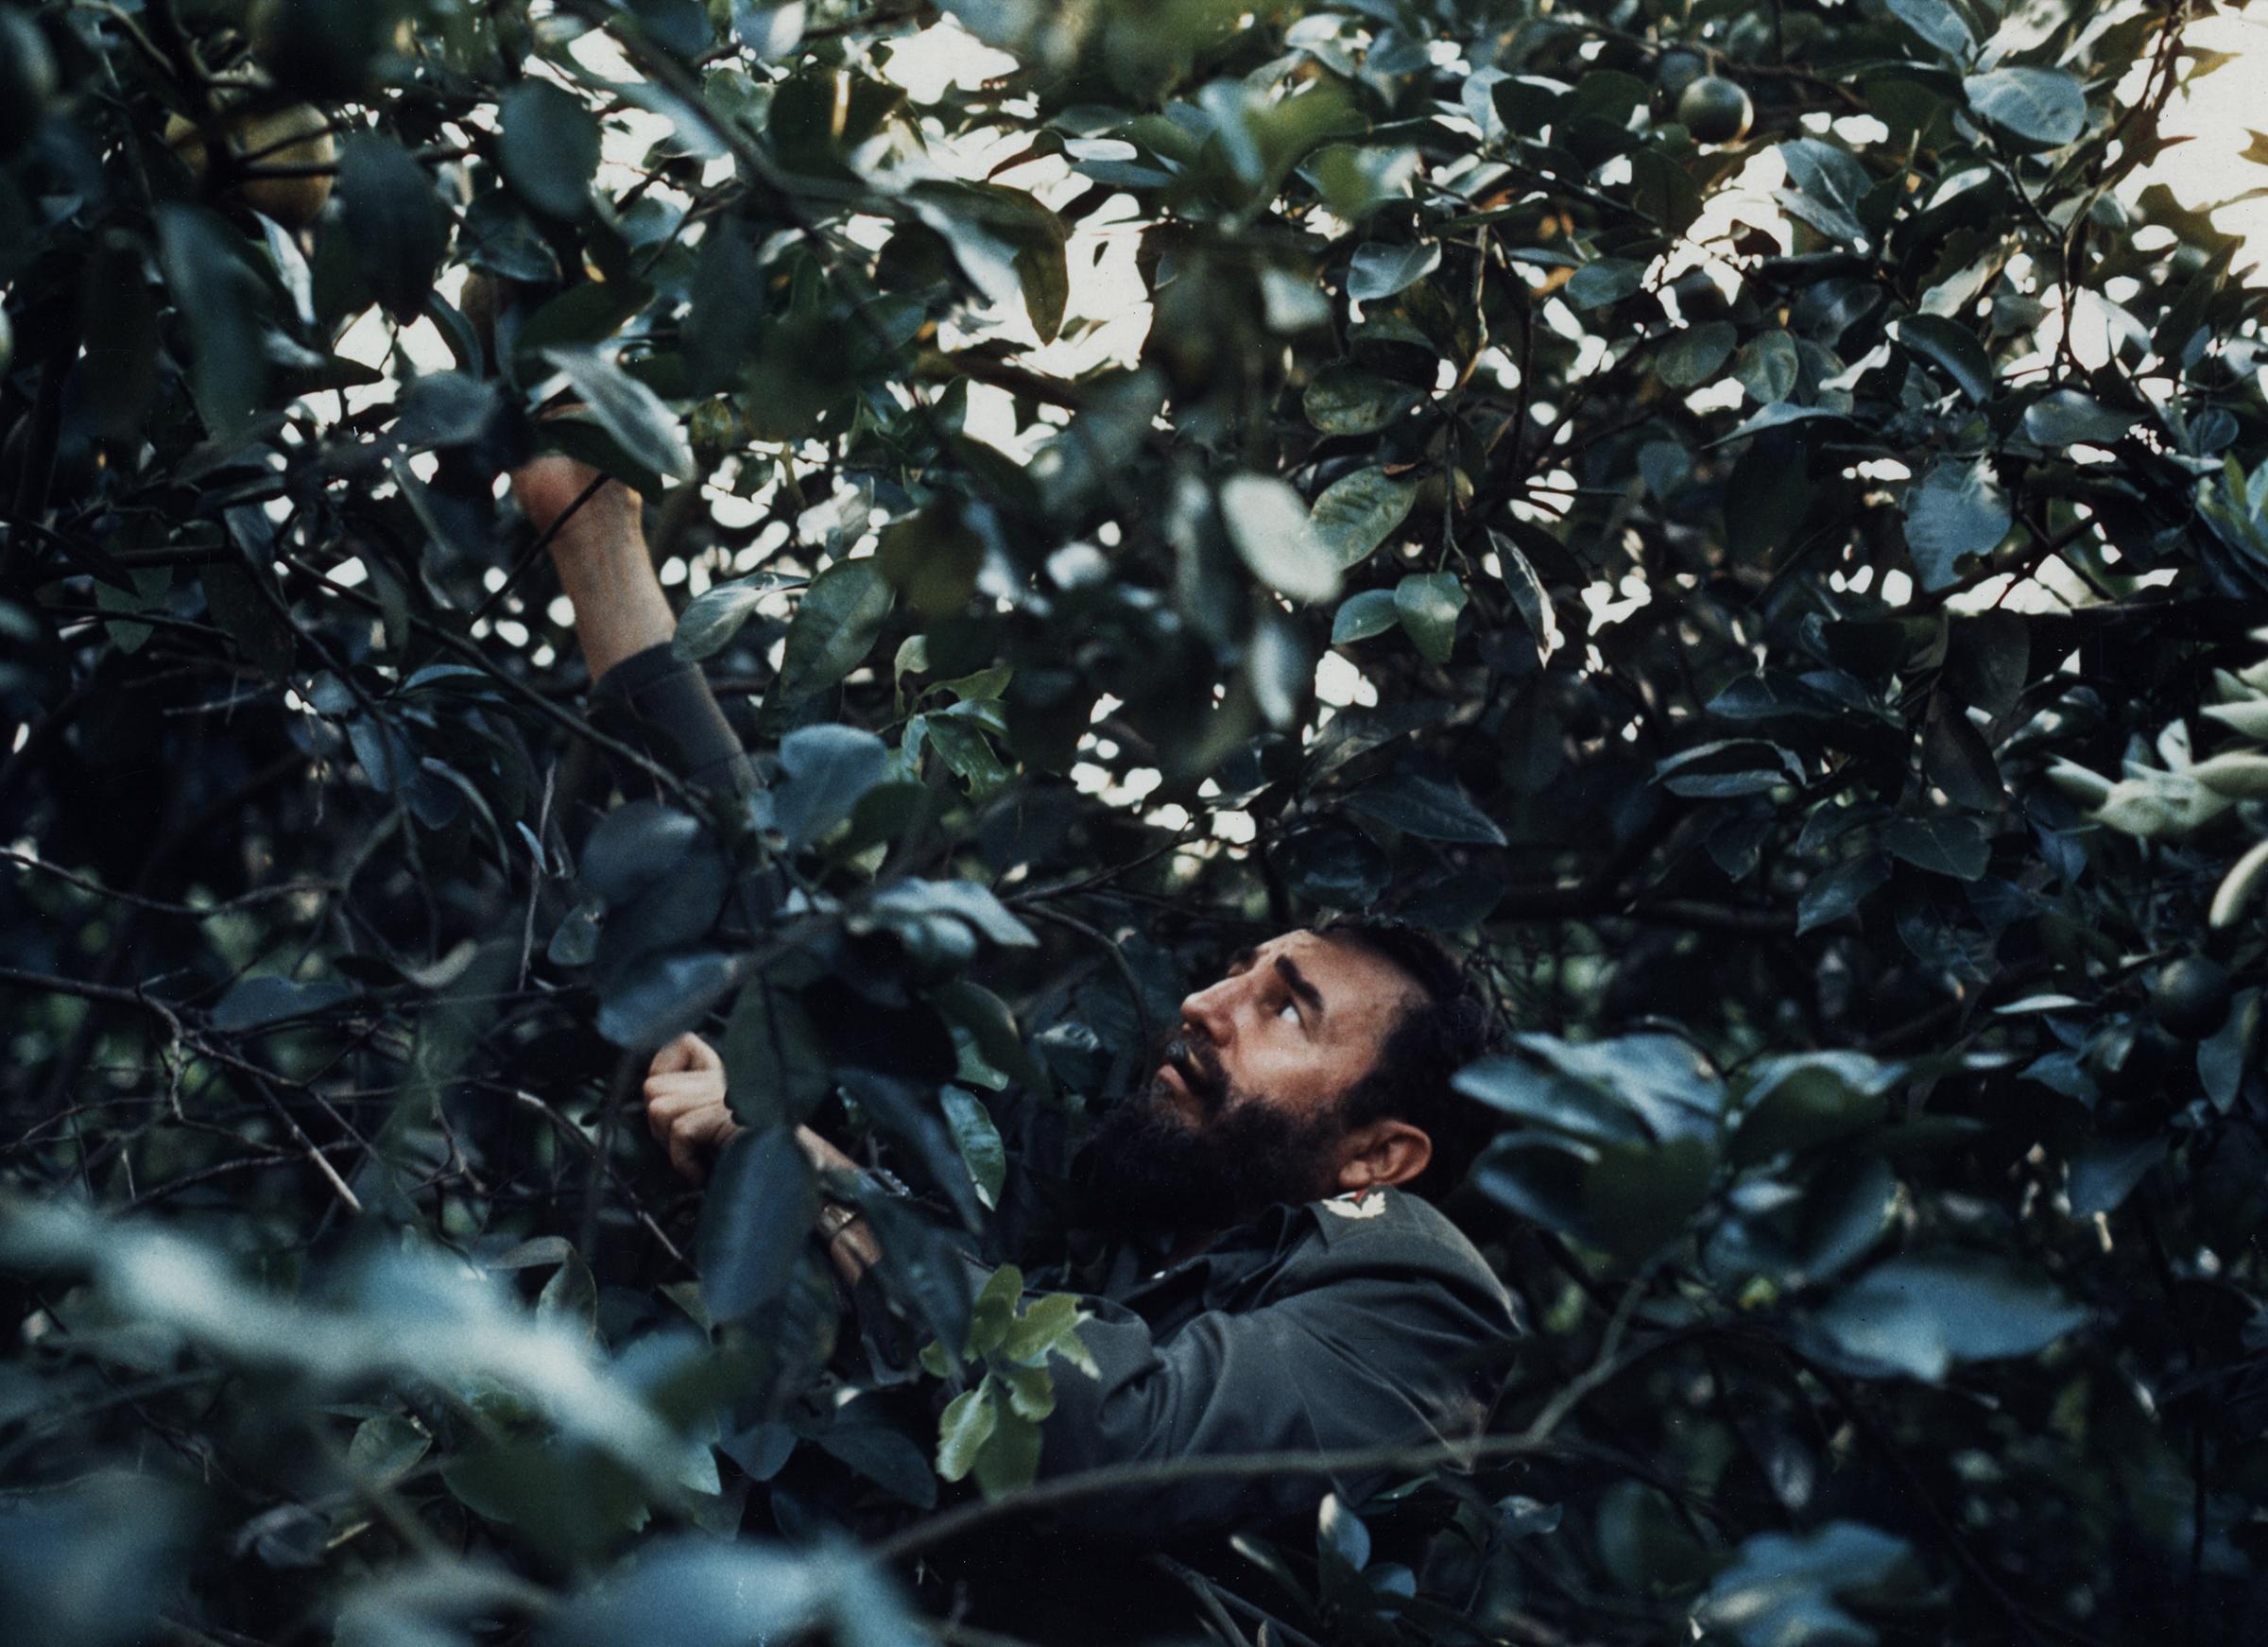 Fidel Castro surrounded by grapefruit trees.